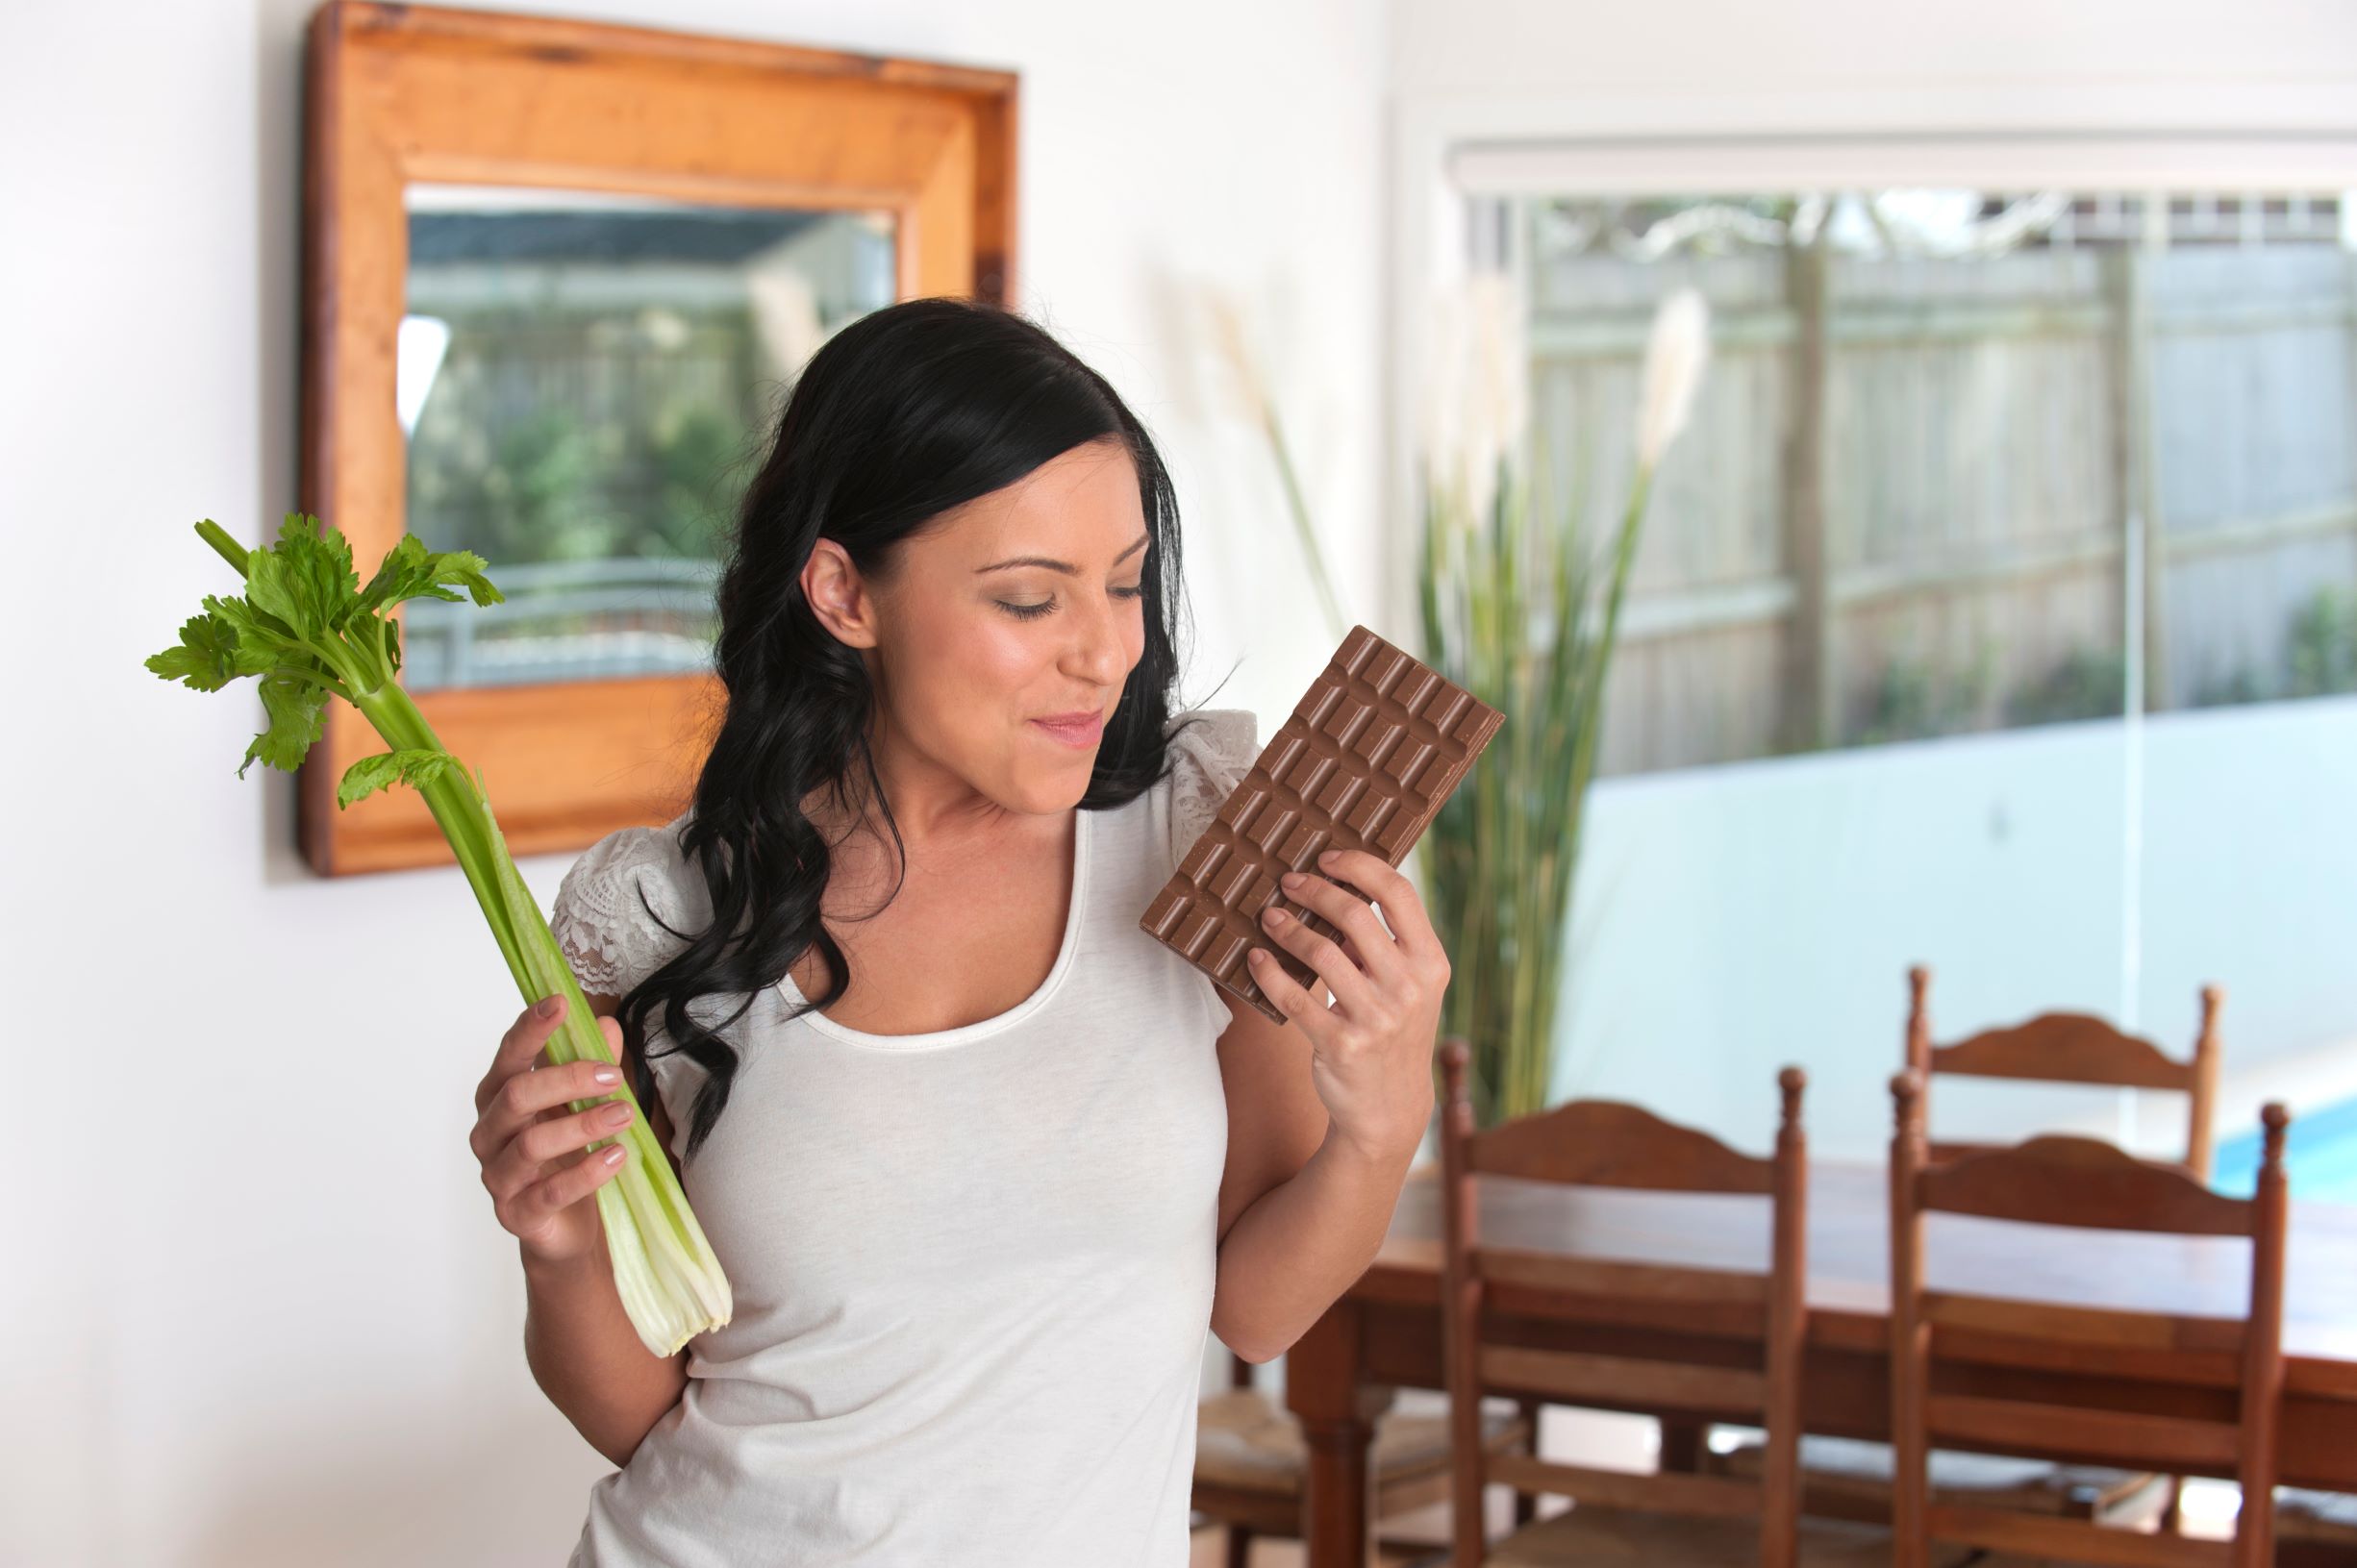 While the woman in this picture is debating between a block of chocolate and a large stick of celery as a snack, you can have both. While chocolate is a sugary and acidic food that can damage your teeth, celery is among the foods that can neutralize acids in your mouth.